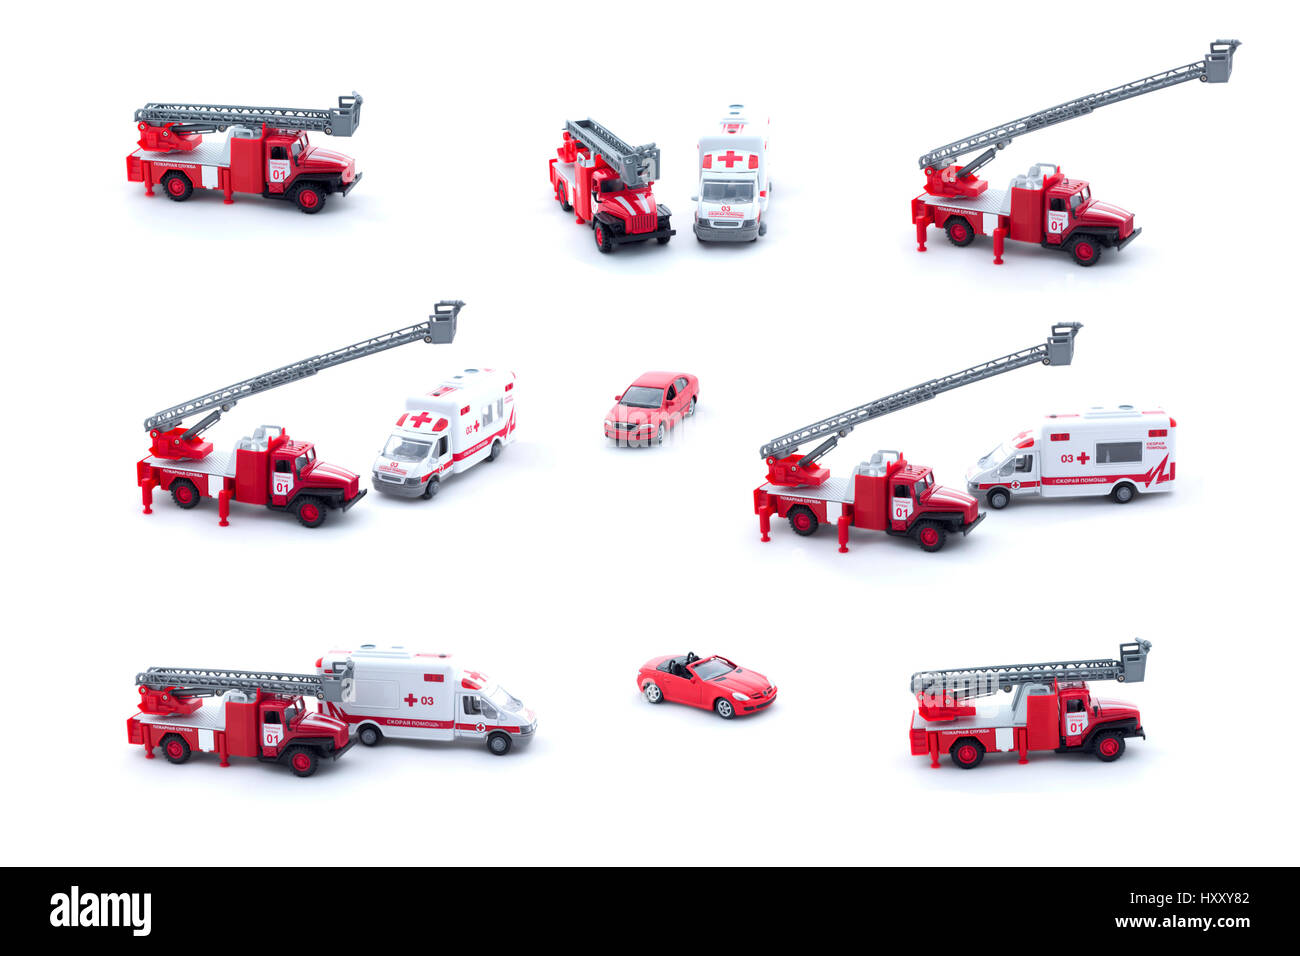 Collage of toy Fire Truck, Ambulance and red car isolated on white background. Stock Photo